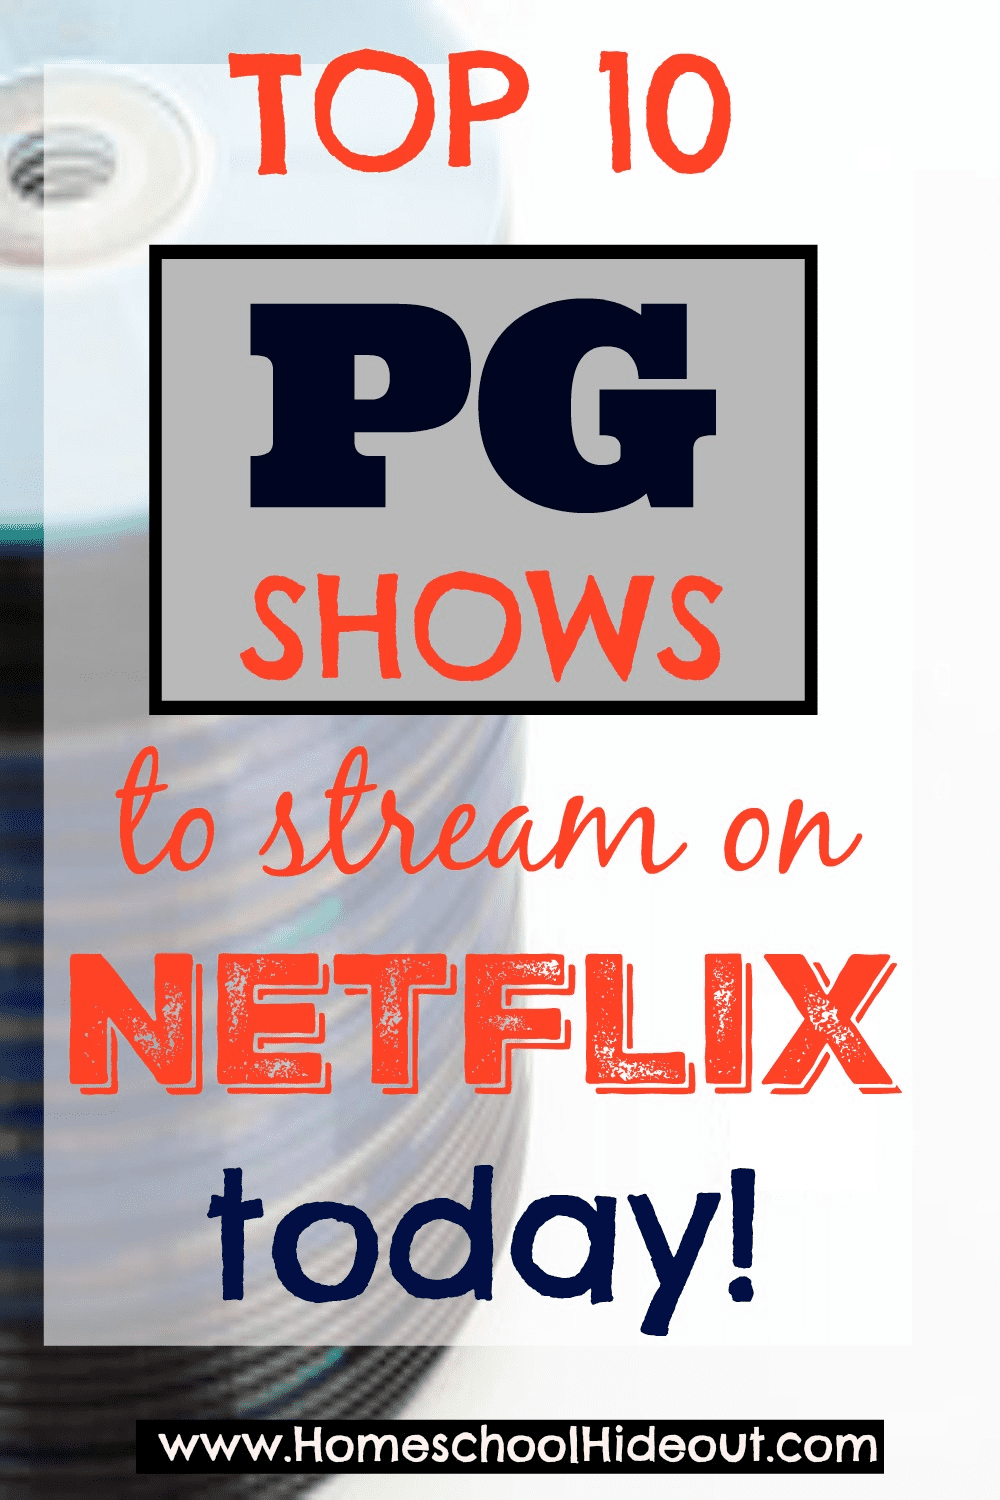 OMG! I forgot about most of these shows! You can find me on the couch for the next couple of months, binge-watching! SERIOUSLY, the top 10 PG shows to stream on Netflix! Yes, please!